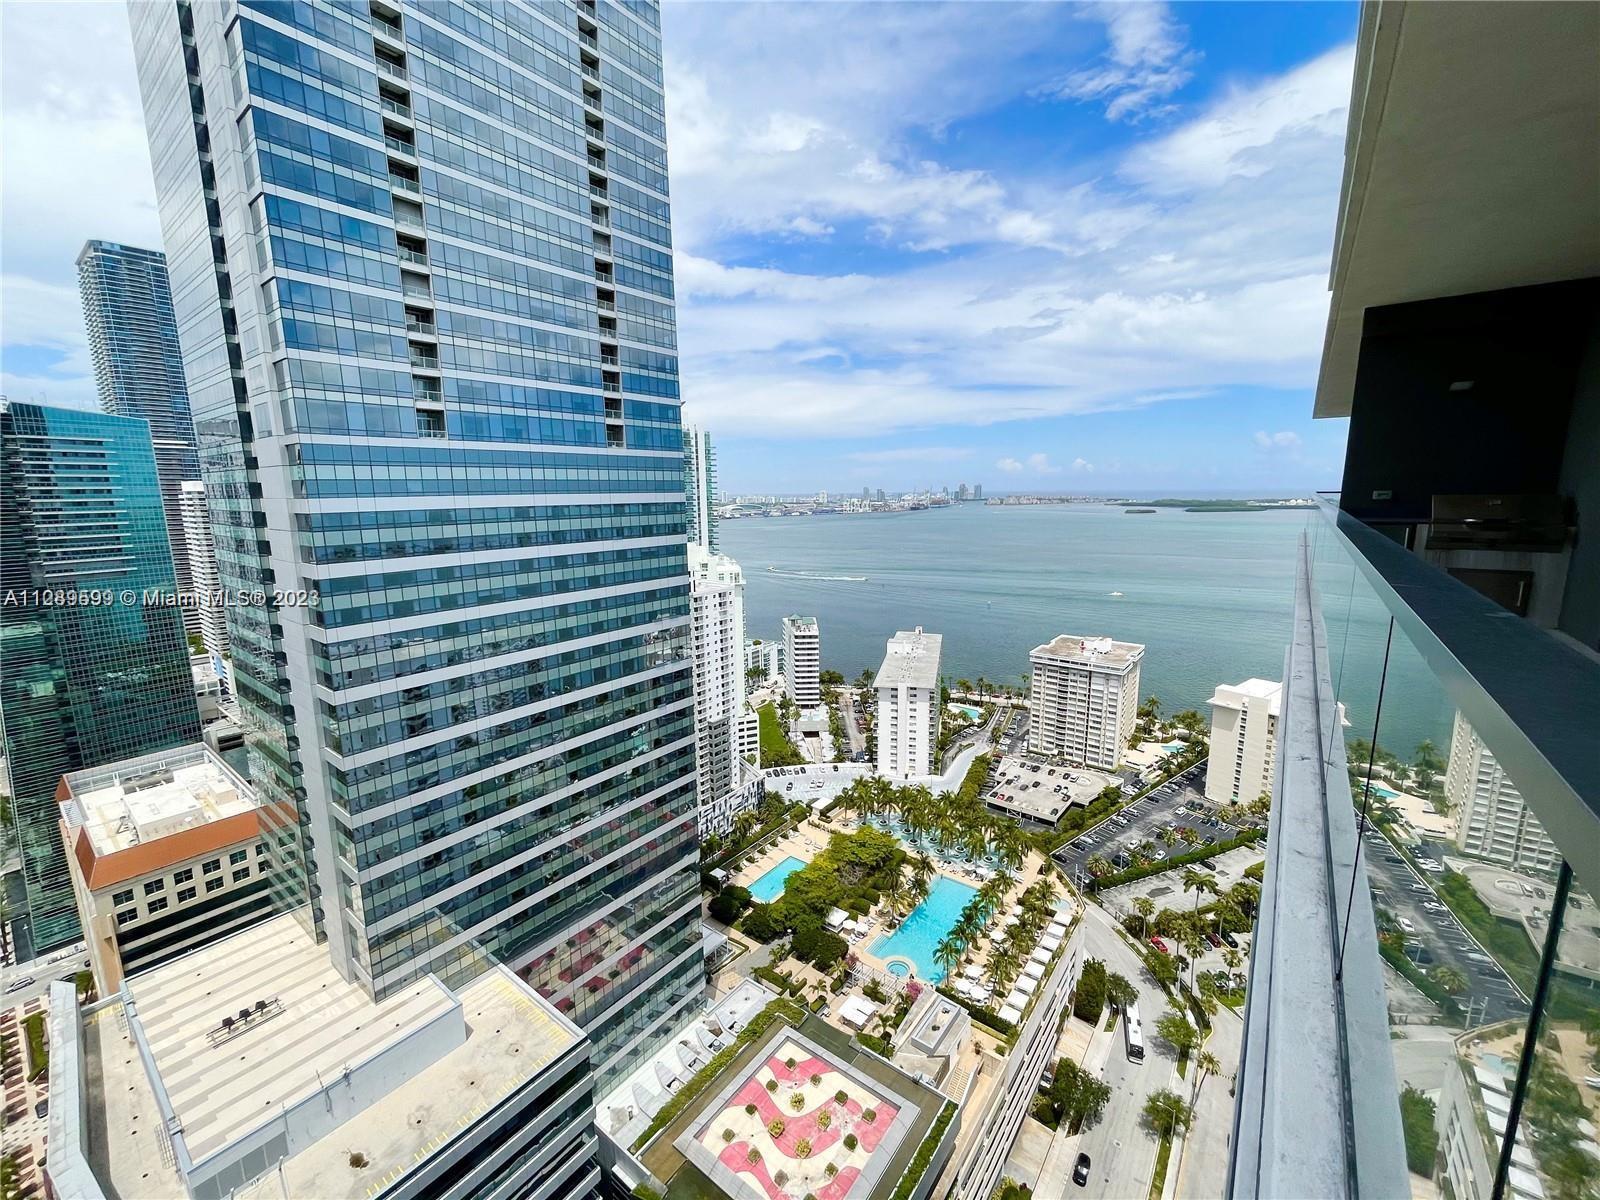 ONE OF A KIND 2 BEDROOM, 2.5 BATH SMART APARTMENT WITH EXPANSIVE TERRACE IN THE HEART OF BRICKELL. RESIDENCE FACES NORTH WEST WITH STUNNING VIEWS OF BRICKELL AND BISCAYNE BAY, WITH BREATHTAKING SUNSETS. BUILT IN BBQ AND SUMMER KITCHEN. FLOOR TO CEILING WINDOWS, SHADES, ESPRESSO MACHINE, BUILT IN SMART SOUND SYSTEM THROUGHOUT, FULL SIZE WASHER/DRYER, AND TOP OF THE LINE APPLIANCES. 2 PARKING SPACES (VALET). ECHO IS ONE OF THE MOST EXCLUSIVE AND PRESTIGIOUS BRAND NEW BOUTIQUE BUILDINGS. AMENITIES INCLUDE INFINITY VIEW POOL AND DECK SERVING FOOD AND DRINKS OVERLOOKING BISCAYNE BAY, CITY AND DOWNTOWN MIAMI, 24/7 CONCIERGE, VALET, SECURITY, FULLY EQUIPPED GYM AND SPA. Tenant occupied until January 2023.